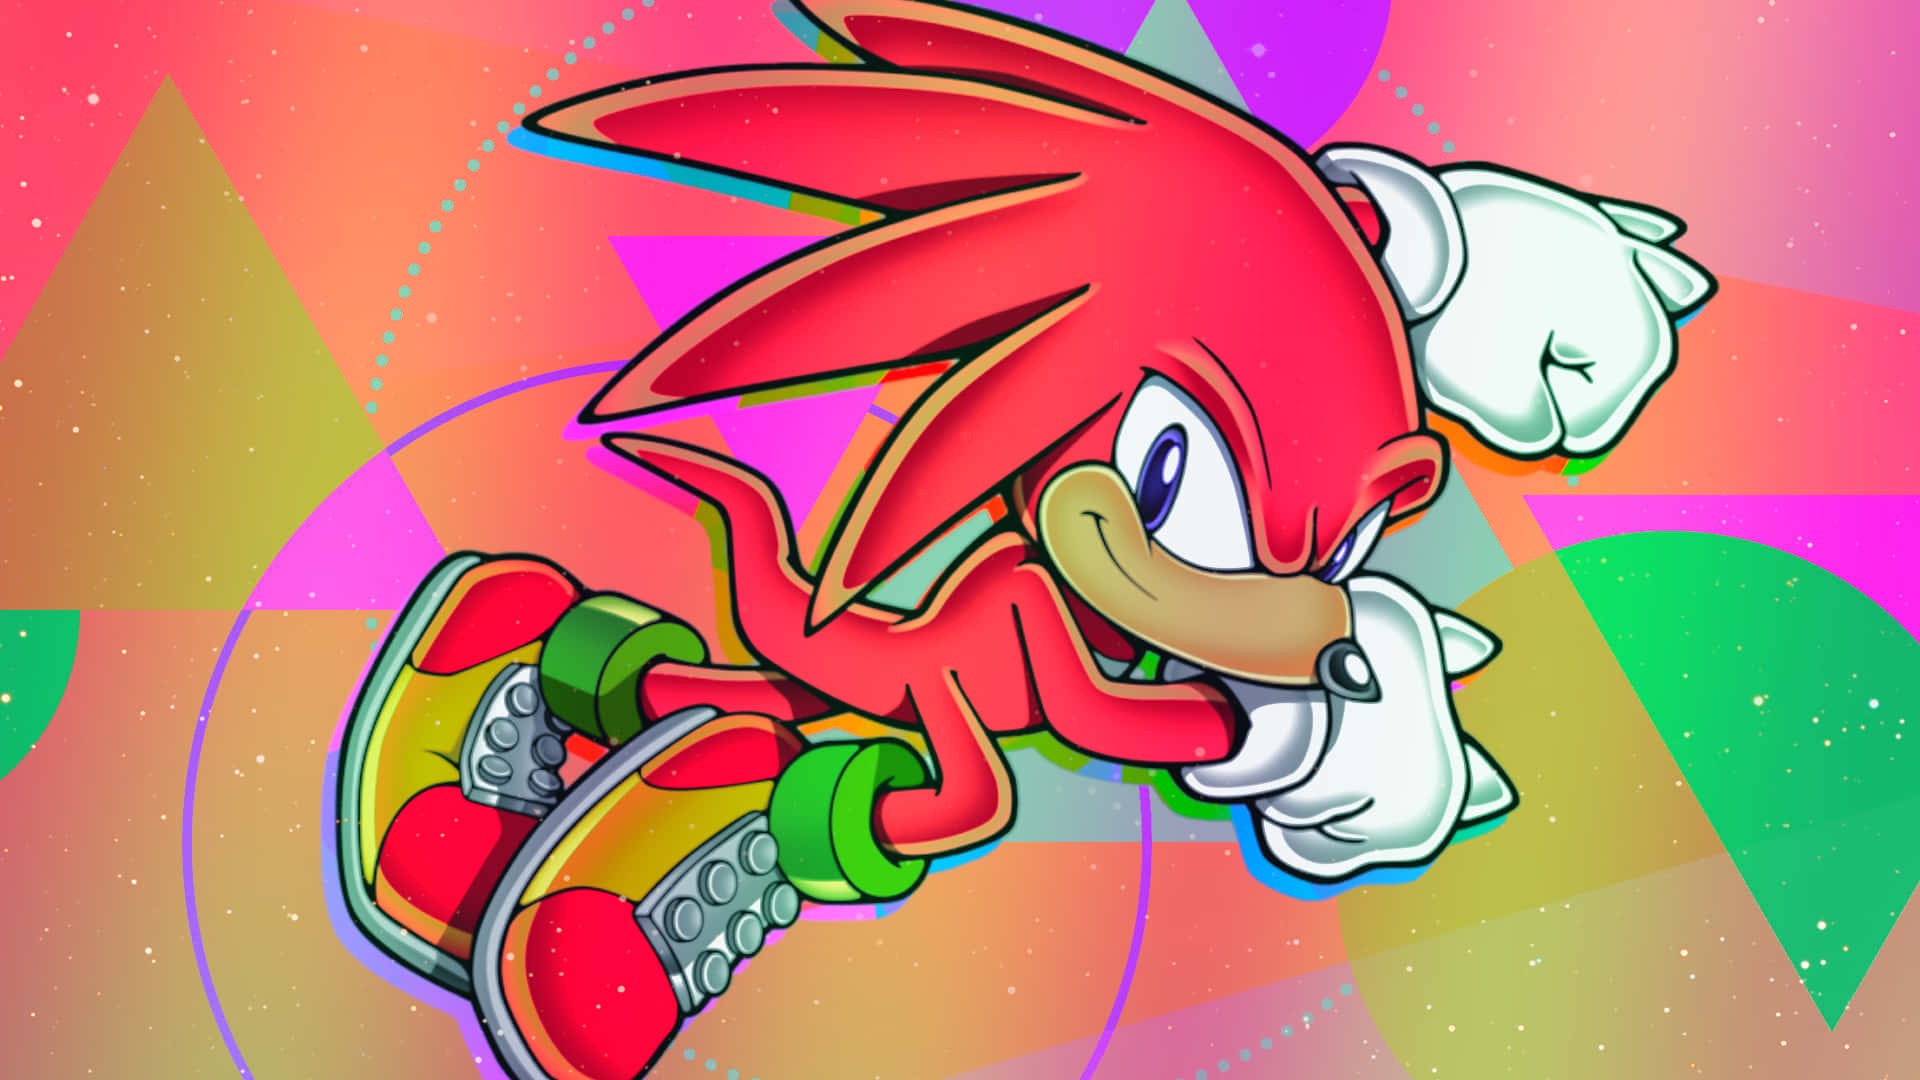 Get the edge with Knuckles! Wallpaper